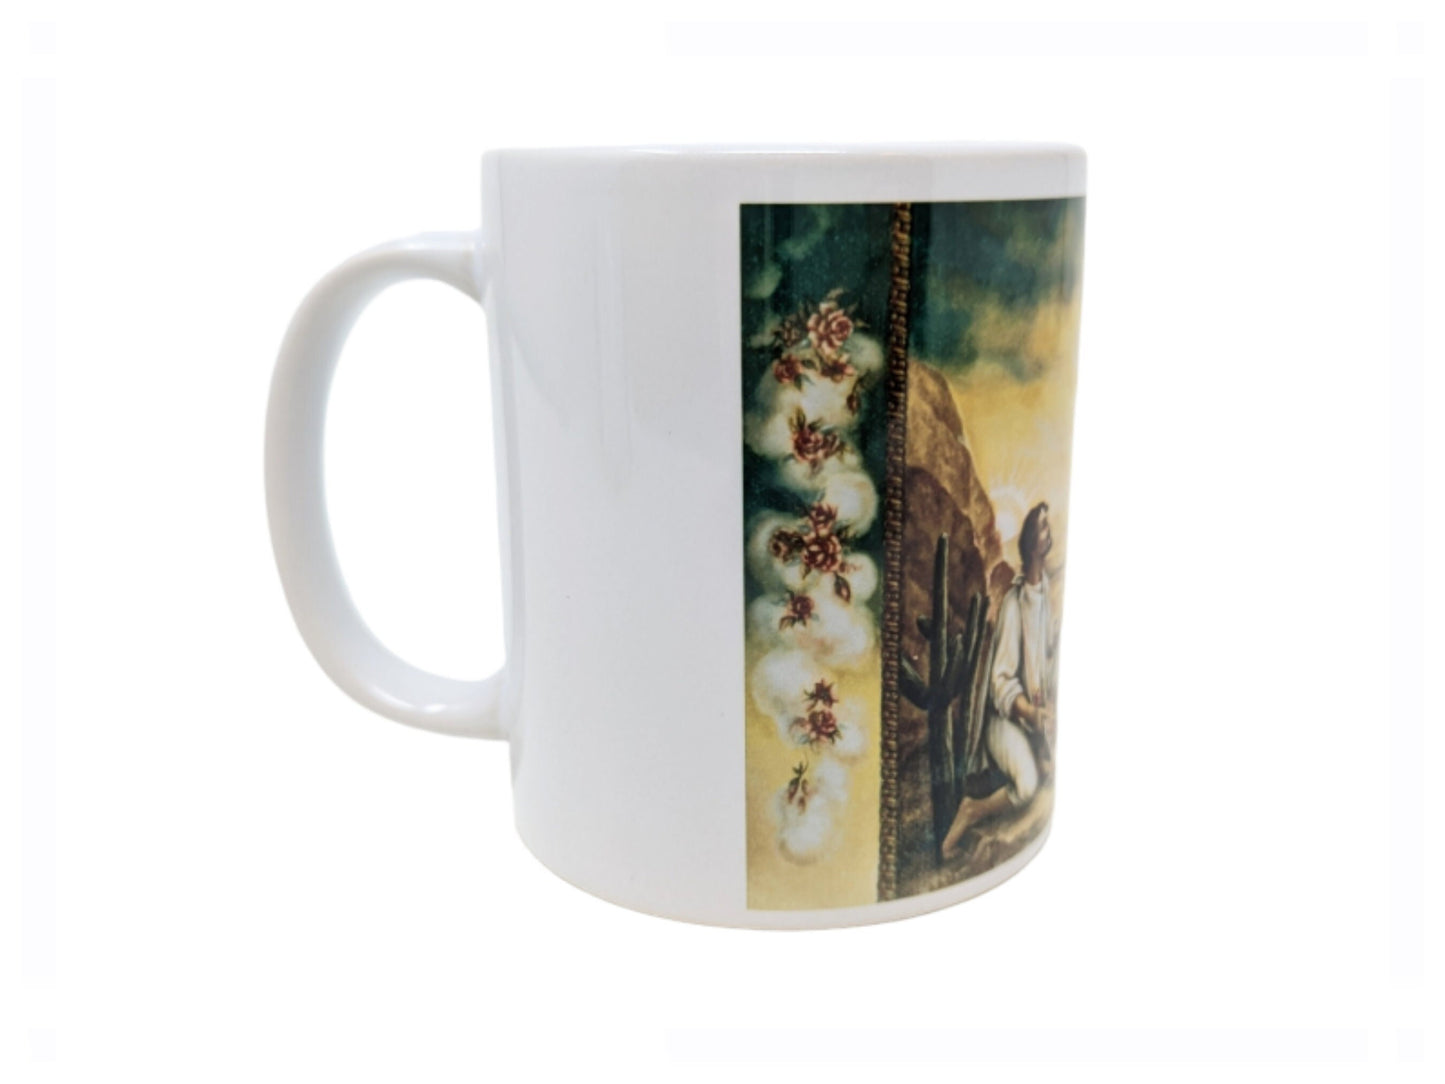 Our Lady of Guadalupe Mug, Patron Saint of Mexico, Catholic gift, Stocking stuffer, Baptism, Holy Communion, Confirmation, Present, Our Lady